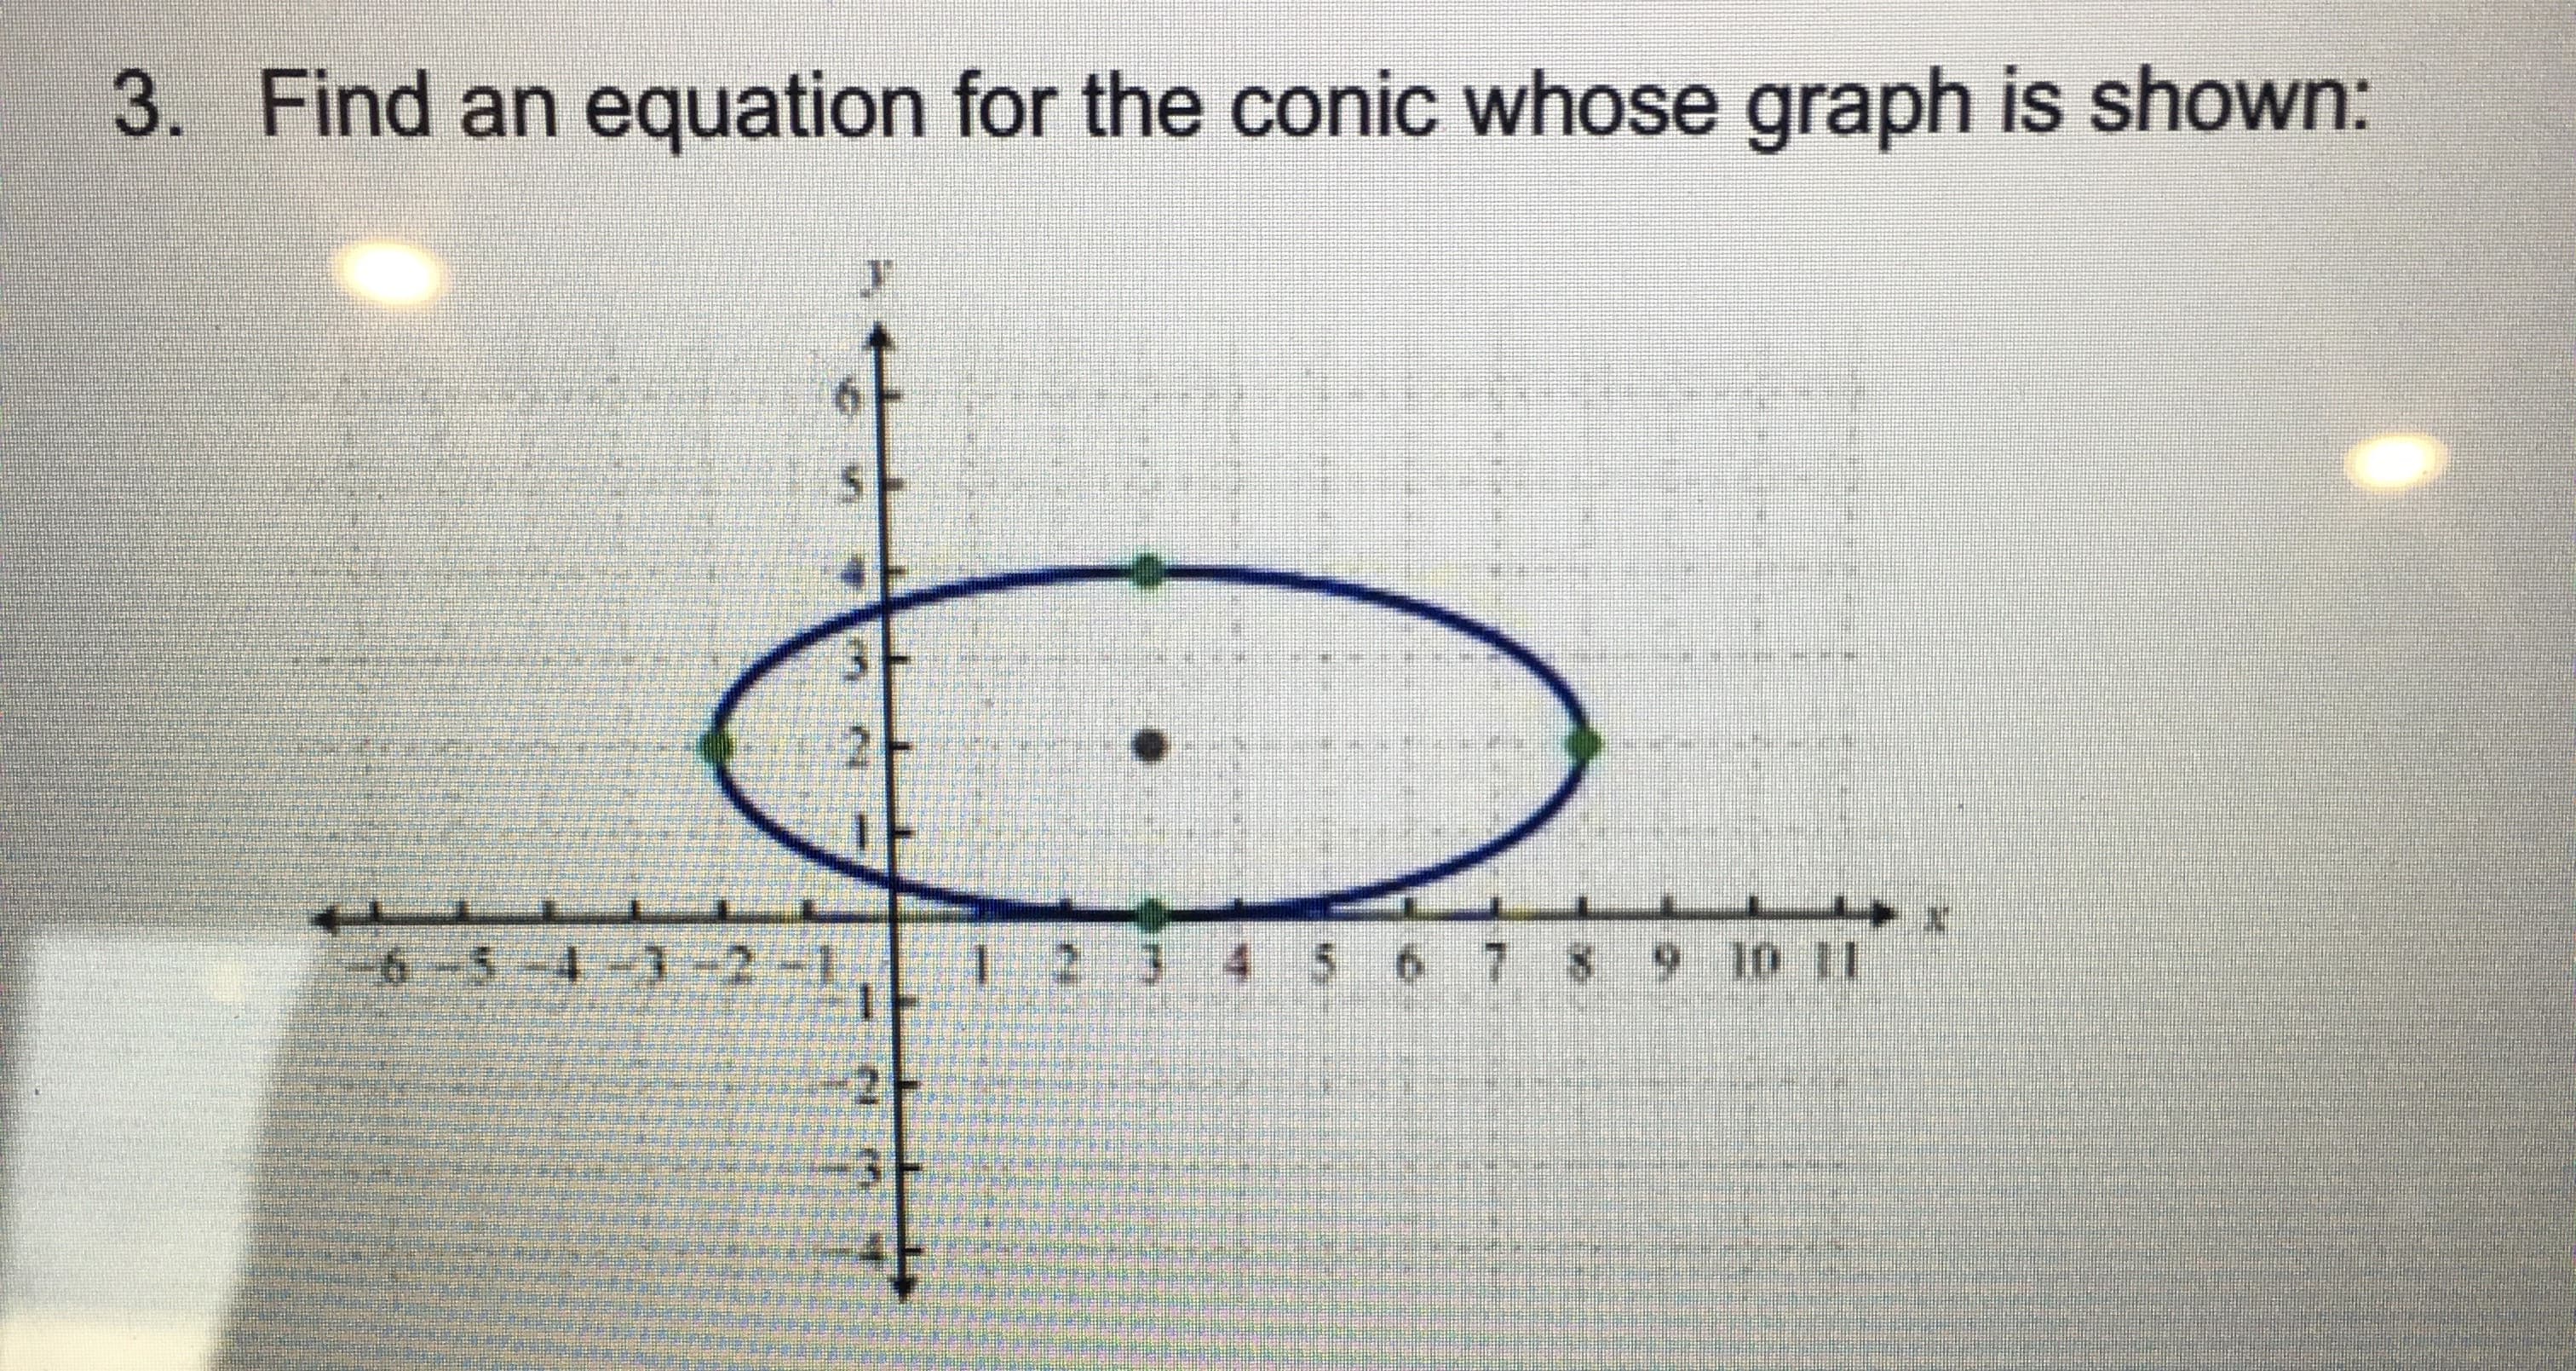 Find an equation for the conic whose graph is shown:
